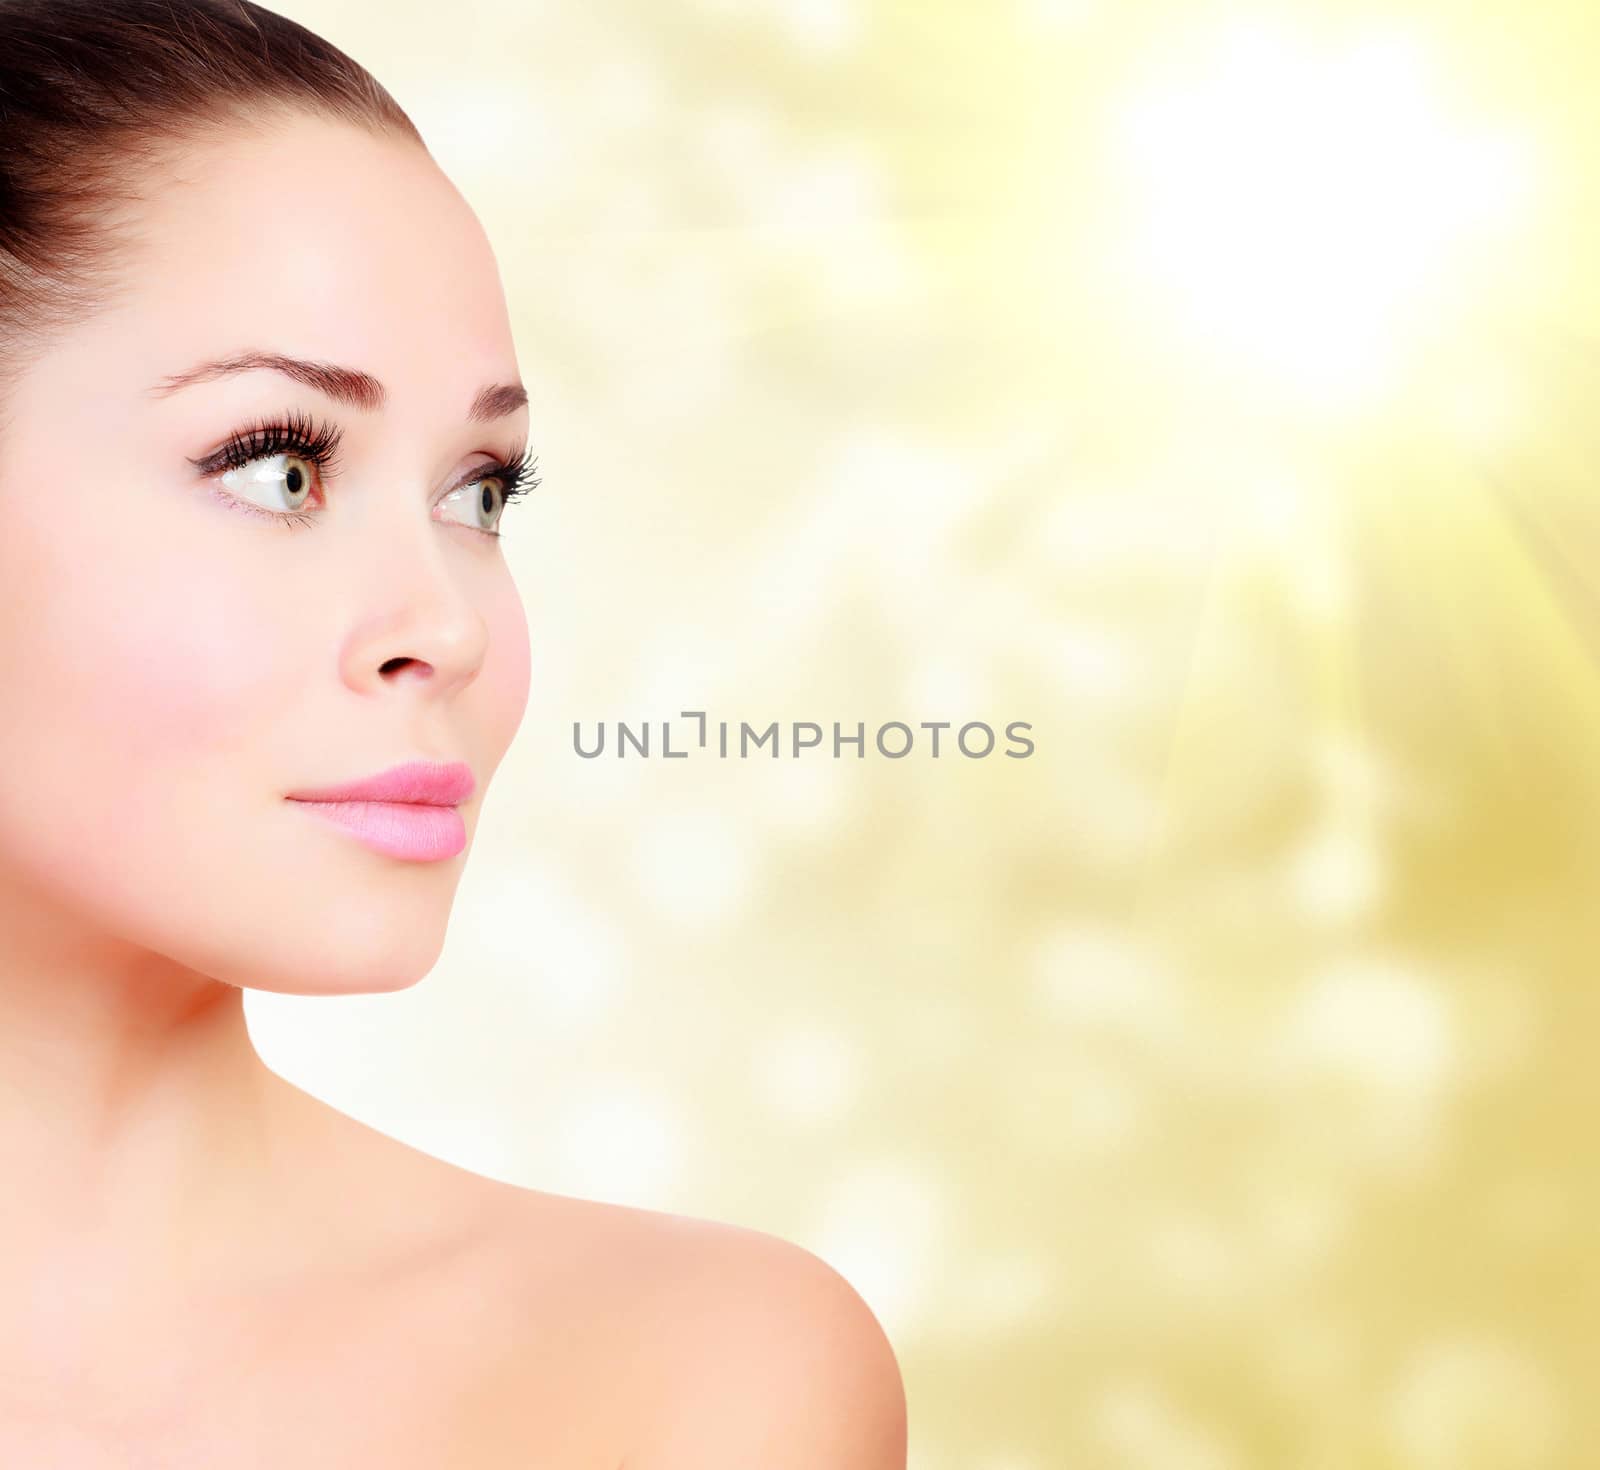 Beautiful woman against an abstract blurred background